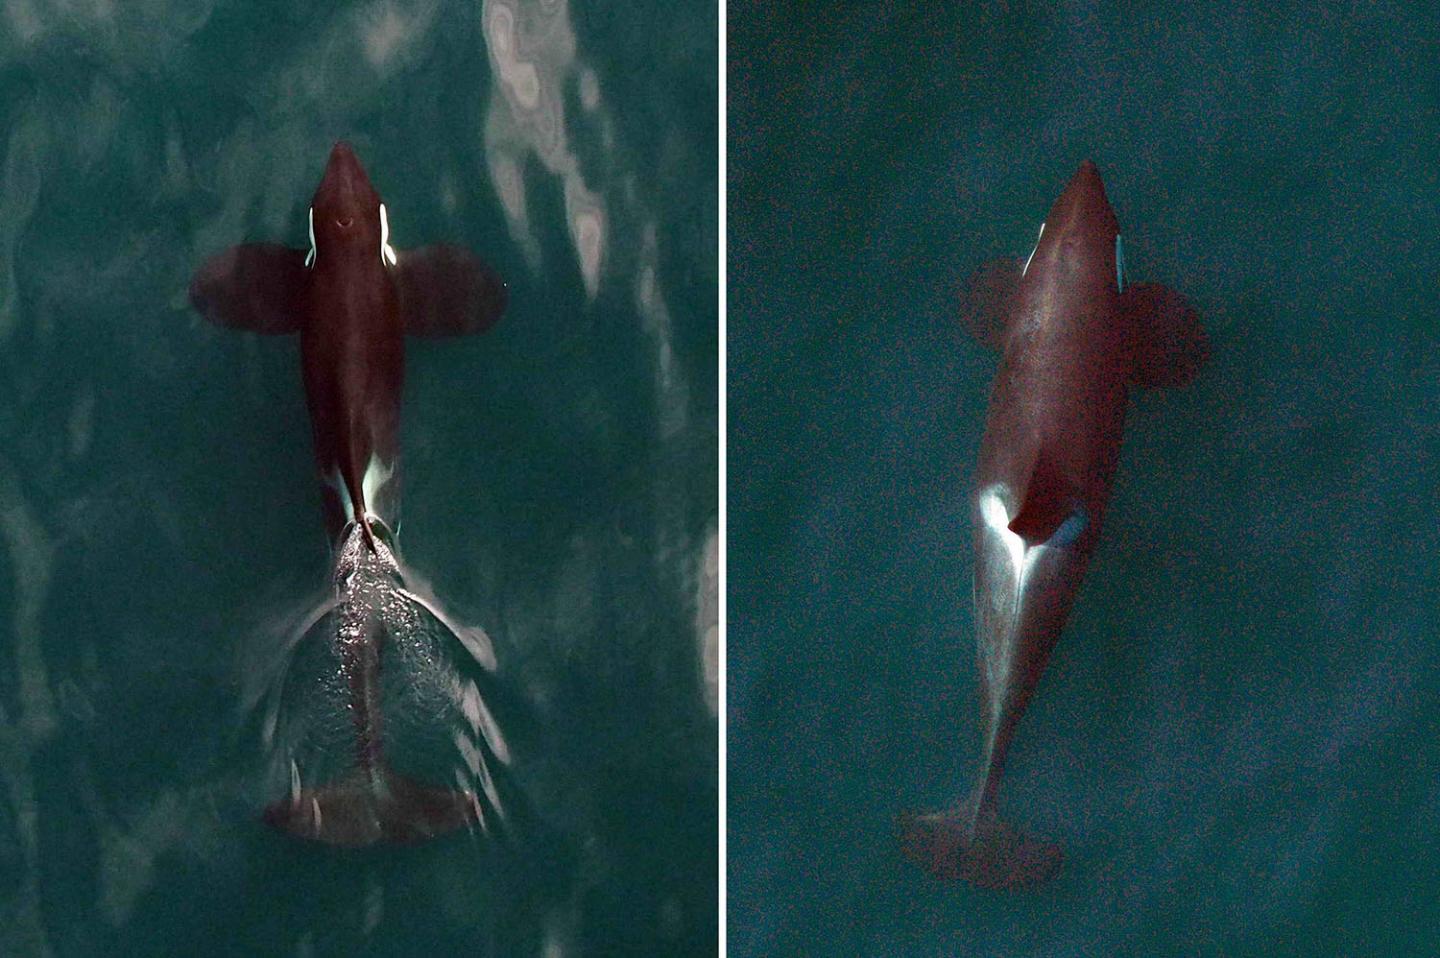 Two Northern Resident Killer Whales